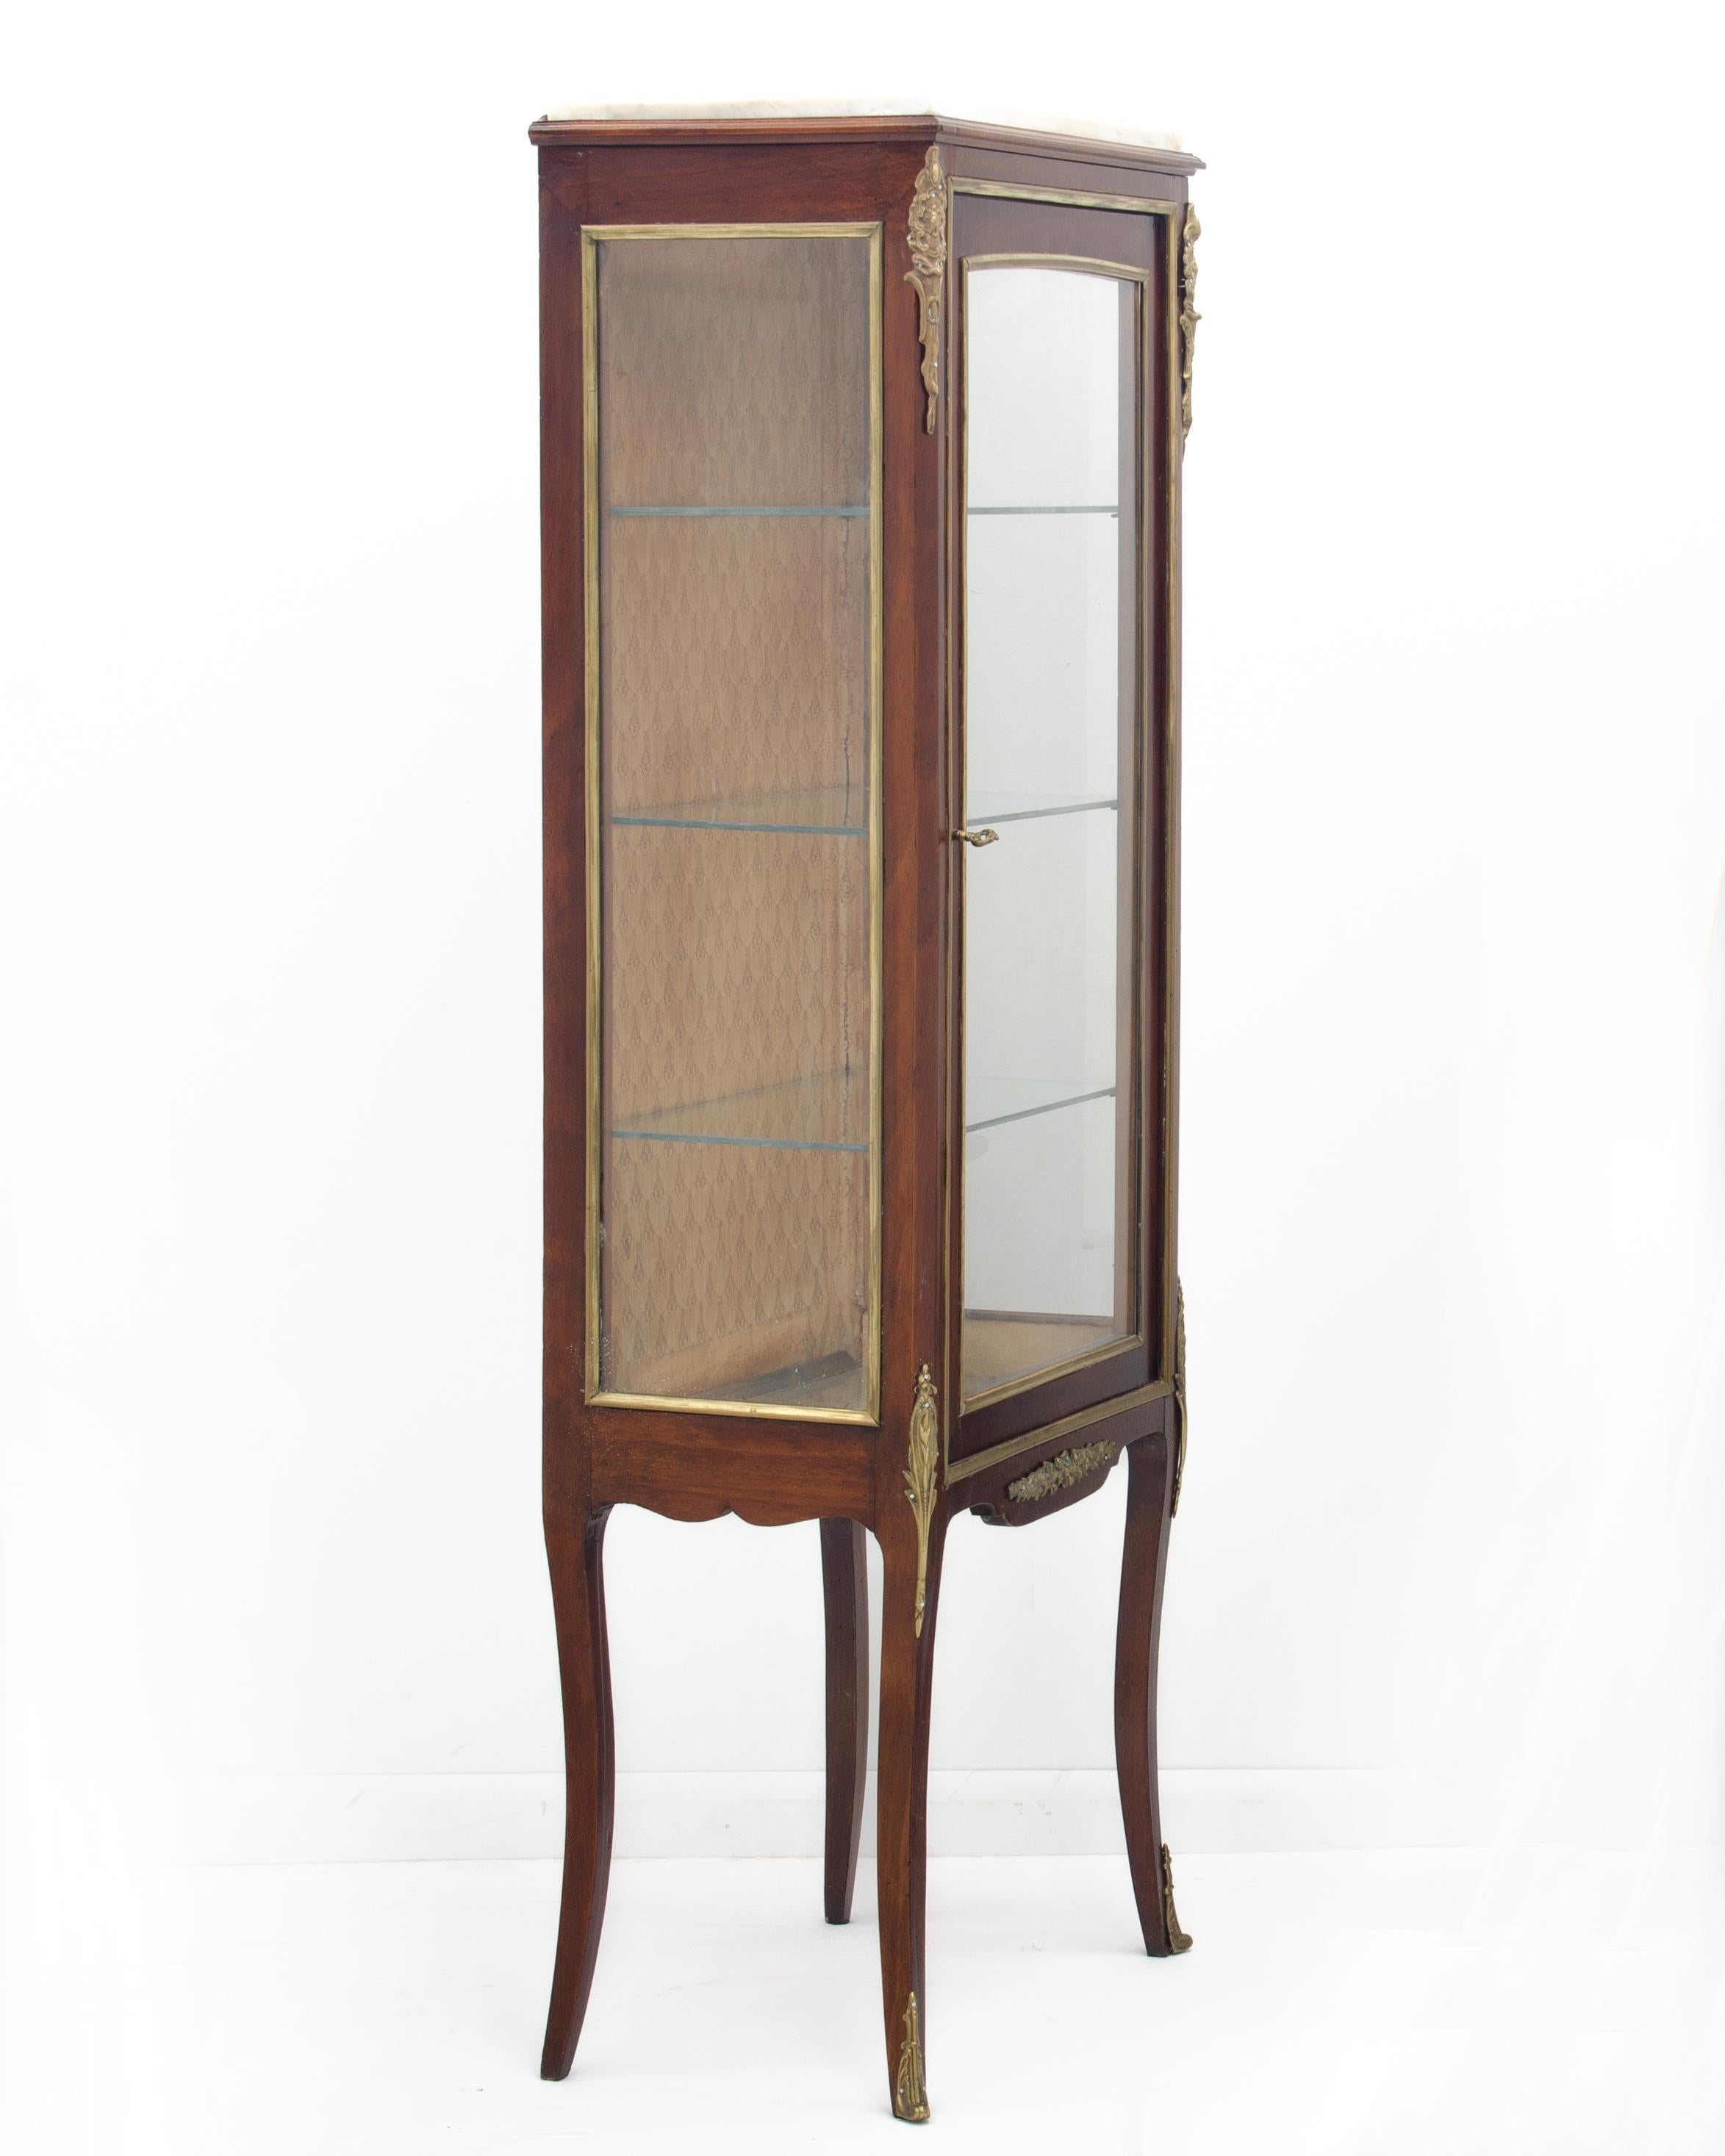 A petite French display cabinet or vitrine from the early 20th century. Fruitwood & ofoliate cast ormolu mounts throughout, fabric backing & white marble top. 
Complete with lock and key.